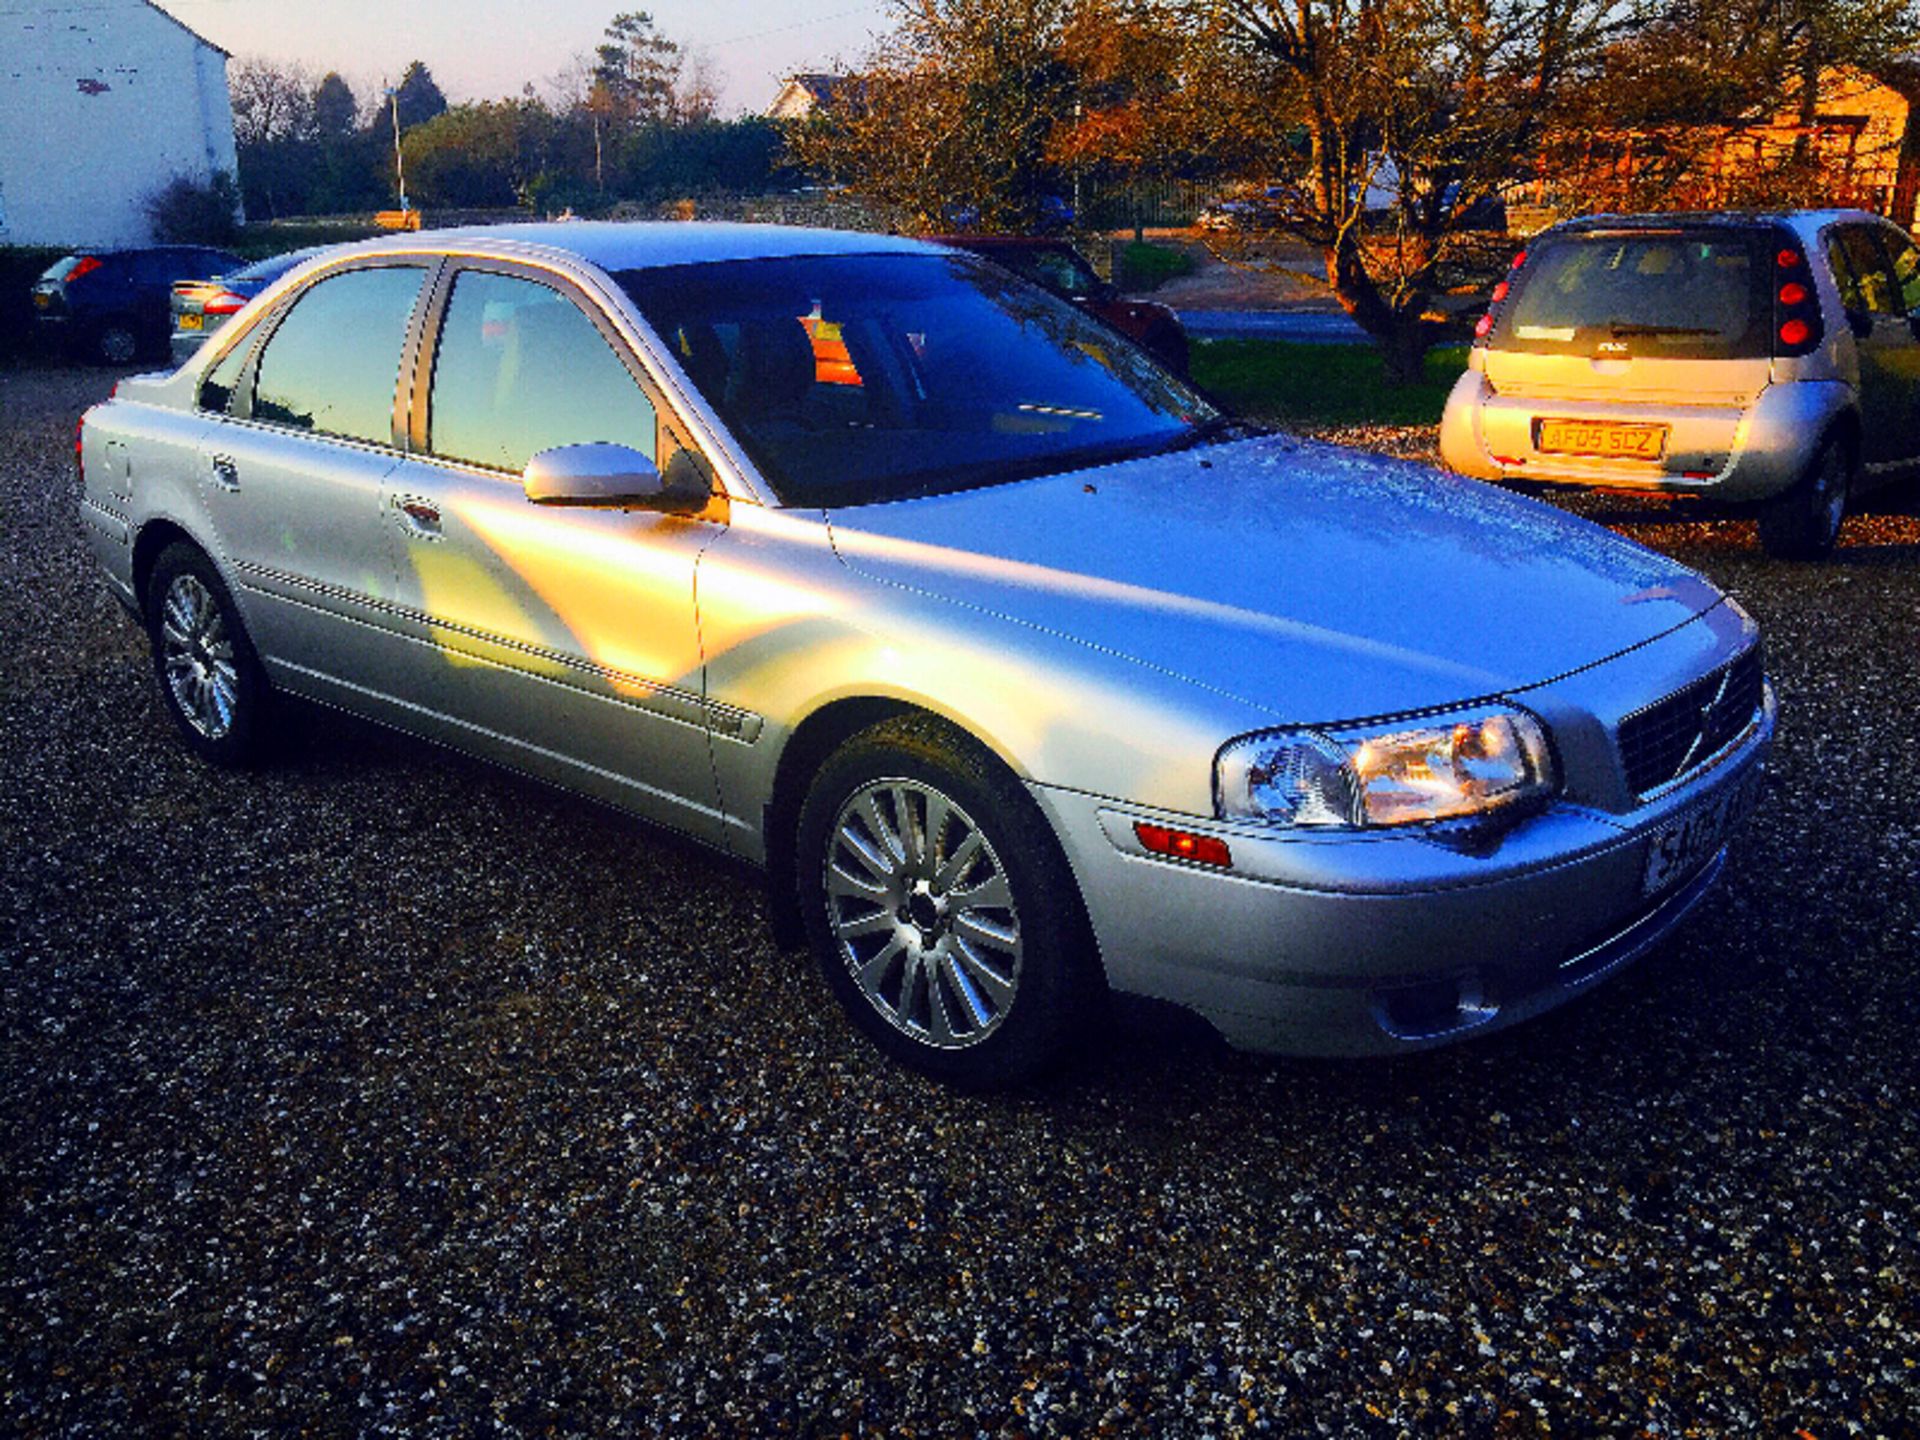 (On Sale) VOLVO S80 SE 2.4 D5 AUTO 2005(05) REG**METALLIC SILVER**A/C*CLIMATE CONTROL*FULL LEATHER* - Image 2 of 17